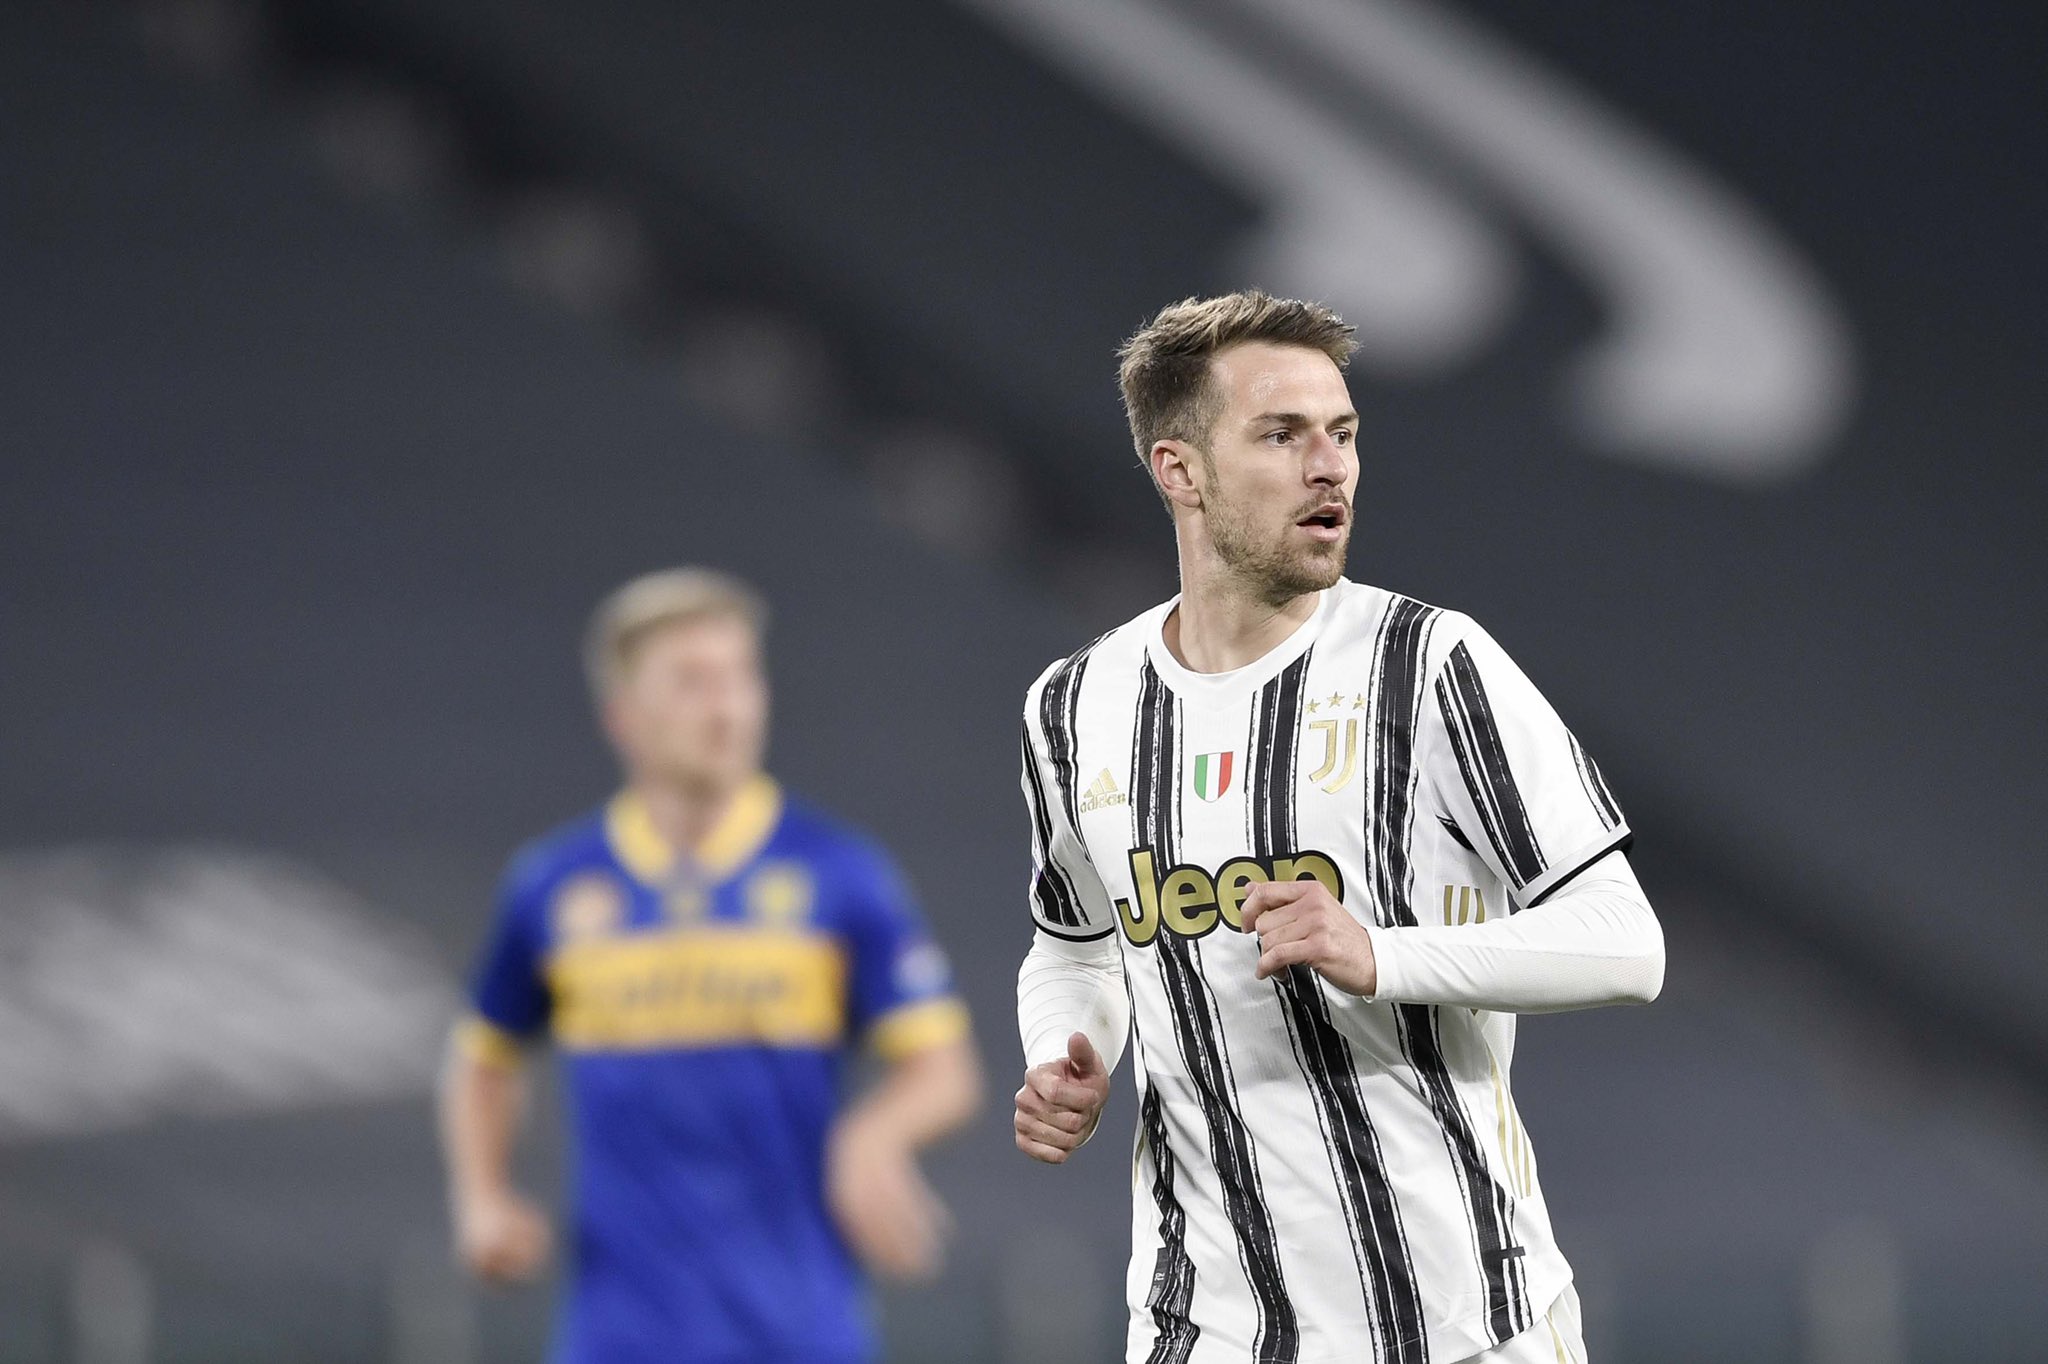 We’ve given Aaron Ramsey few days as he’s an outgoing player, reveals Massimiliano Allegri